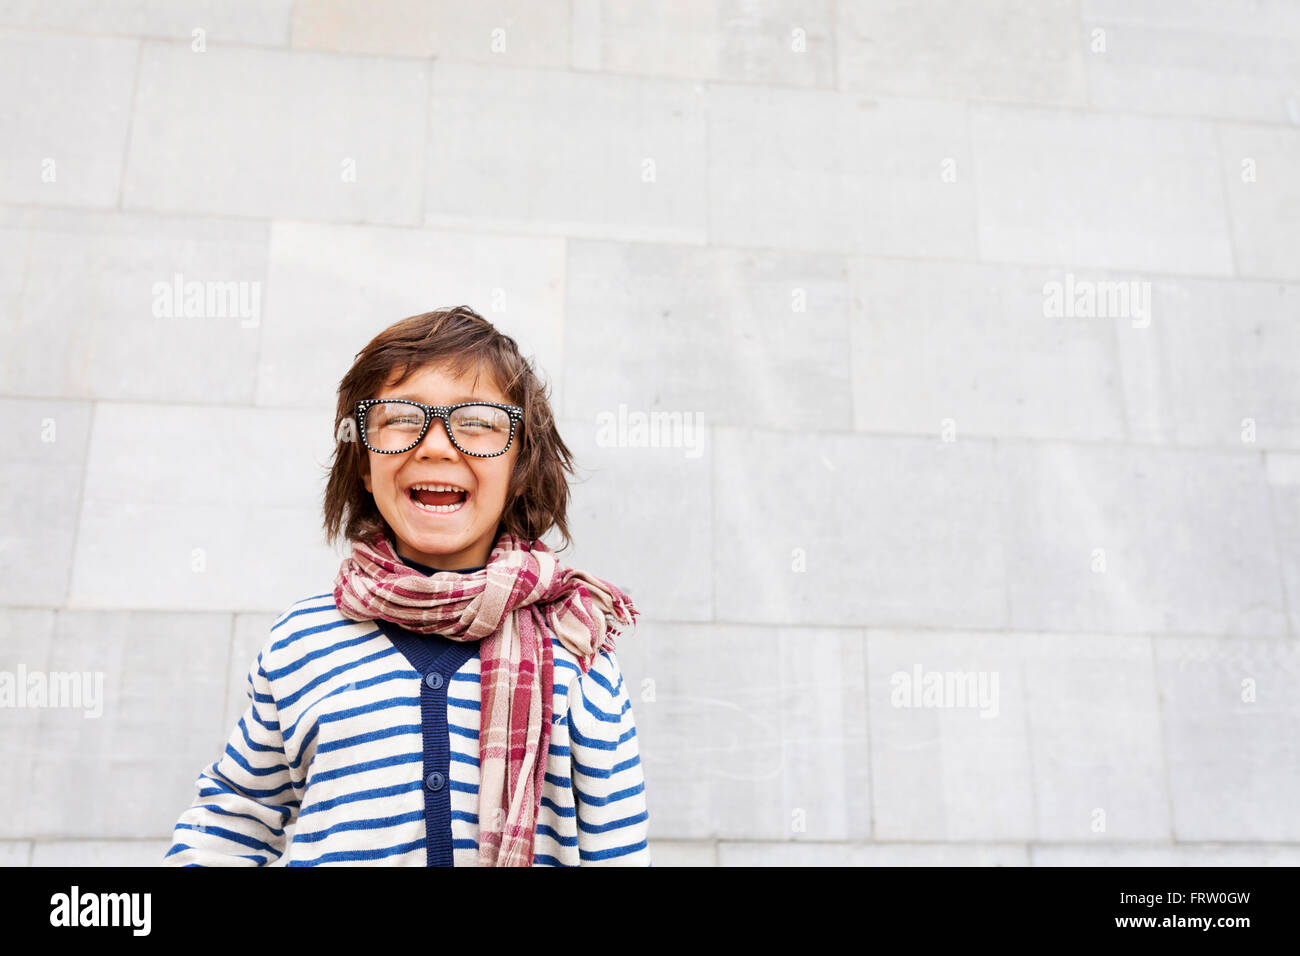 Portrait of laughing little boy wearing scarf and oversized glasses Stock Photo